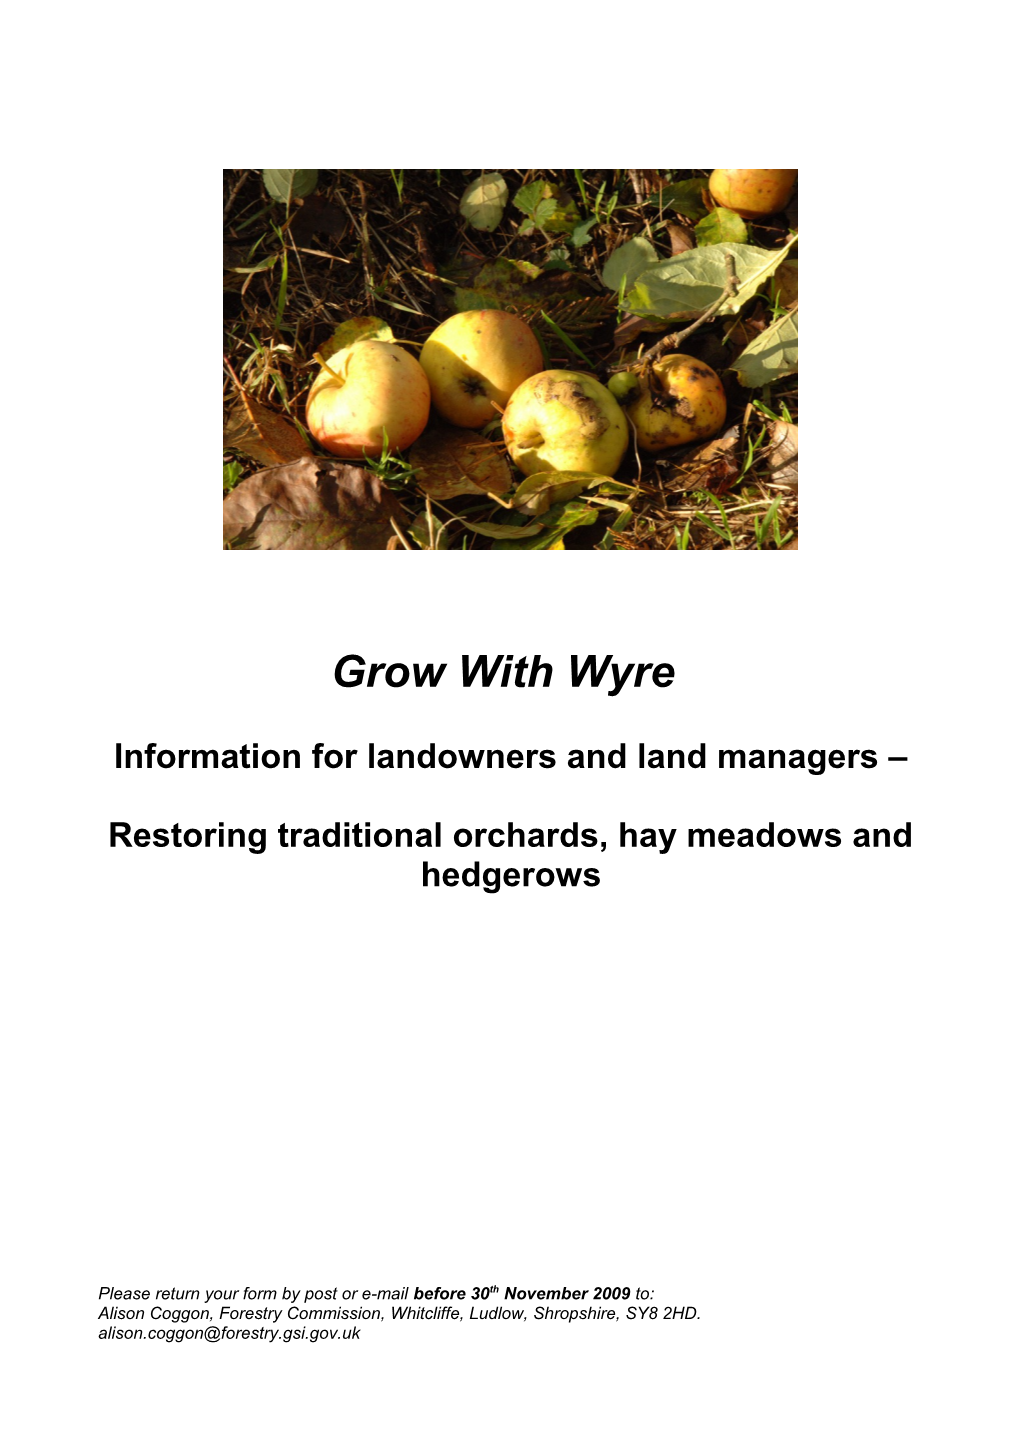 About the Grow with Wyre Project